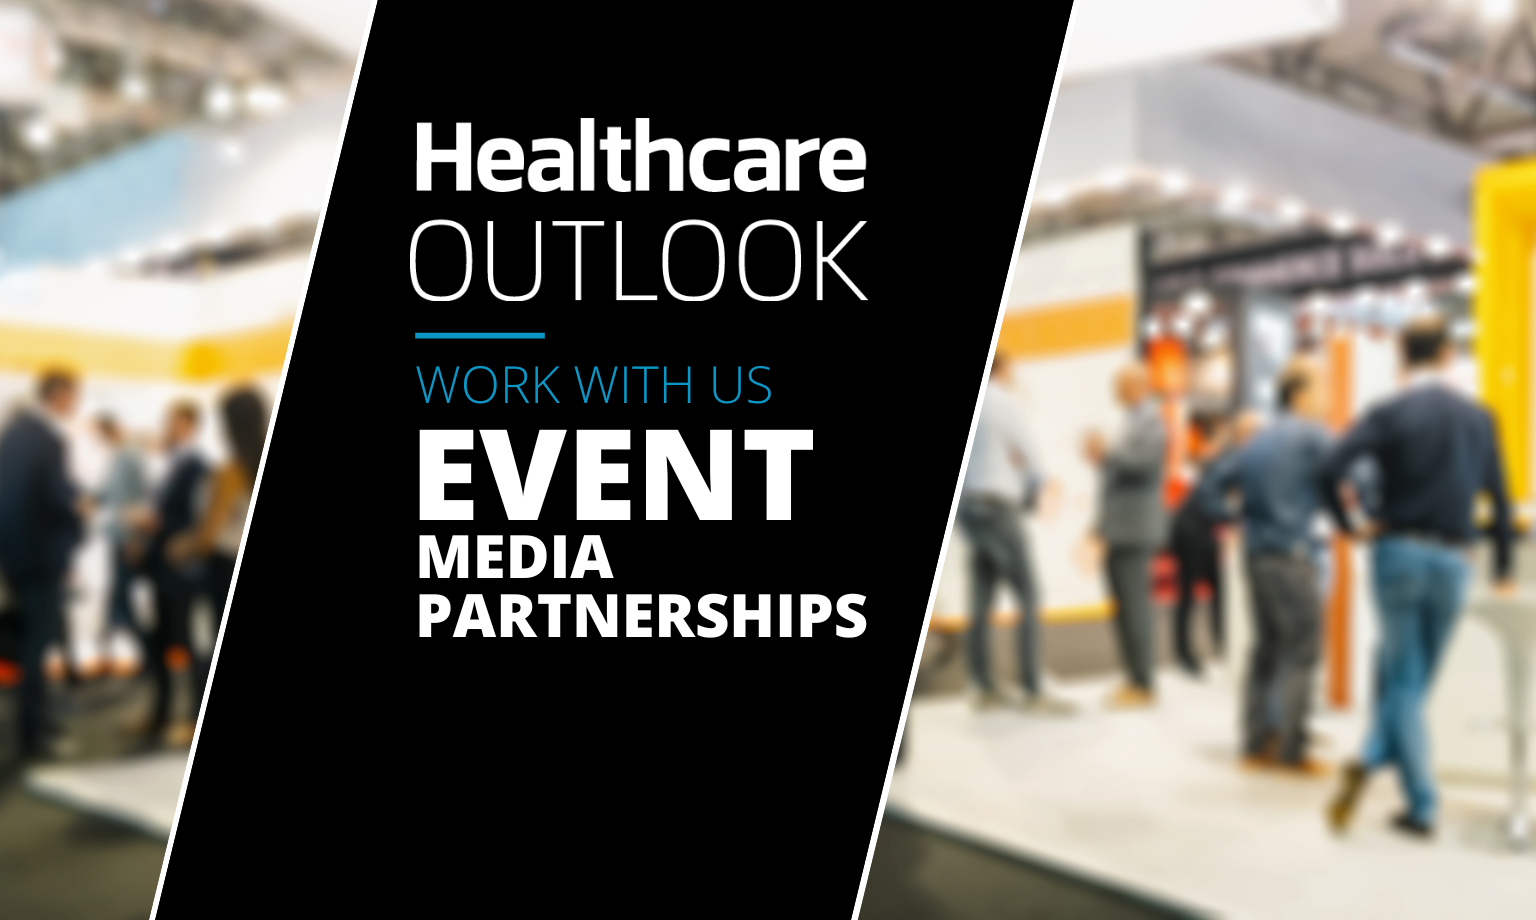 Featured Event Partnerships Healthcare Outlook